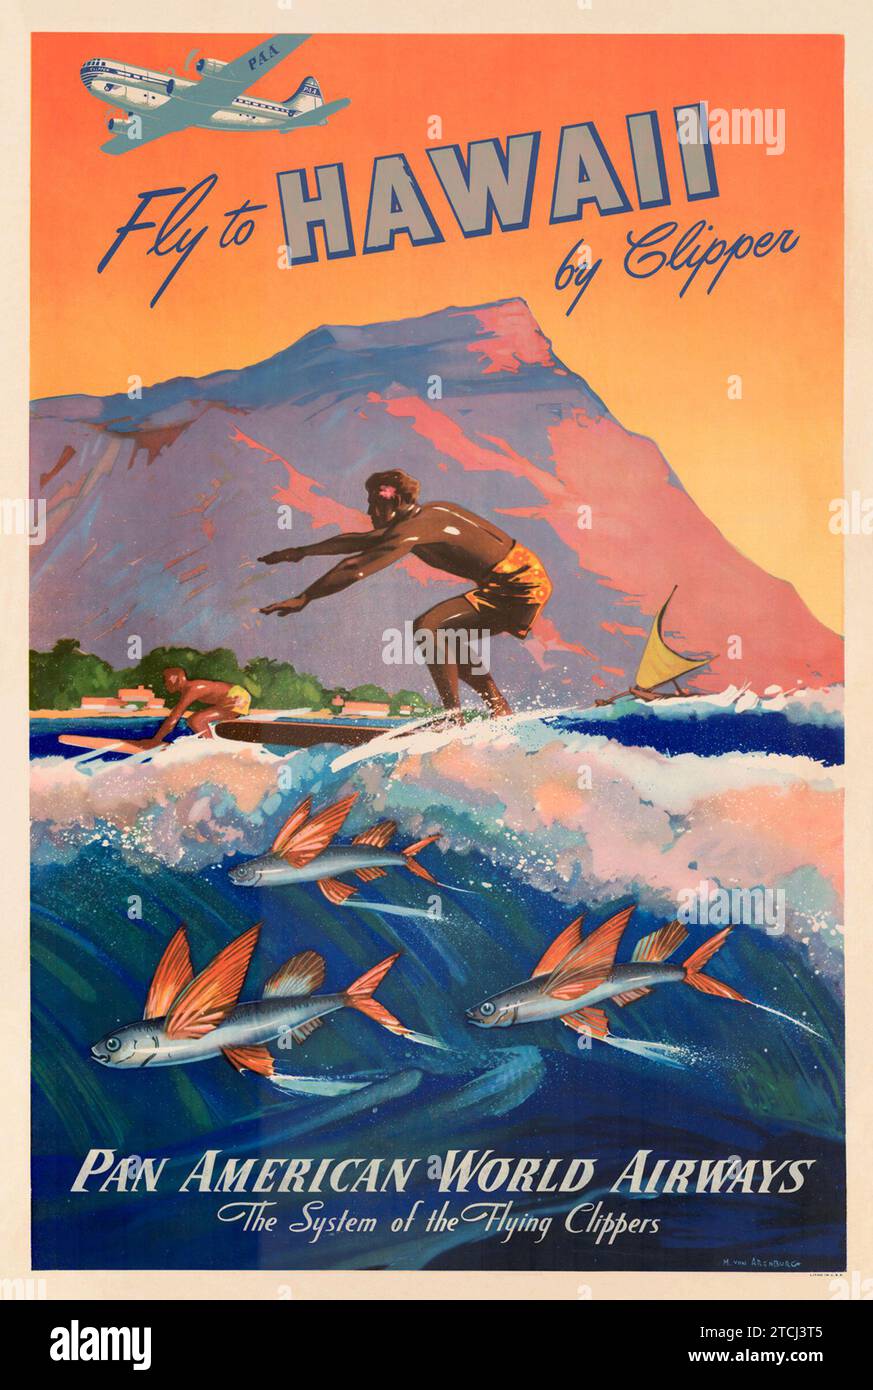 Fly to Hawaii - American Travel Poster, 1940er Jahre - Vintage Surfen - Pan American World Airways, Flying Clippers Stockfoto